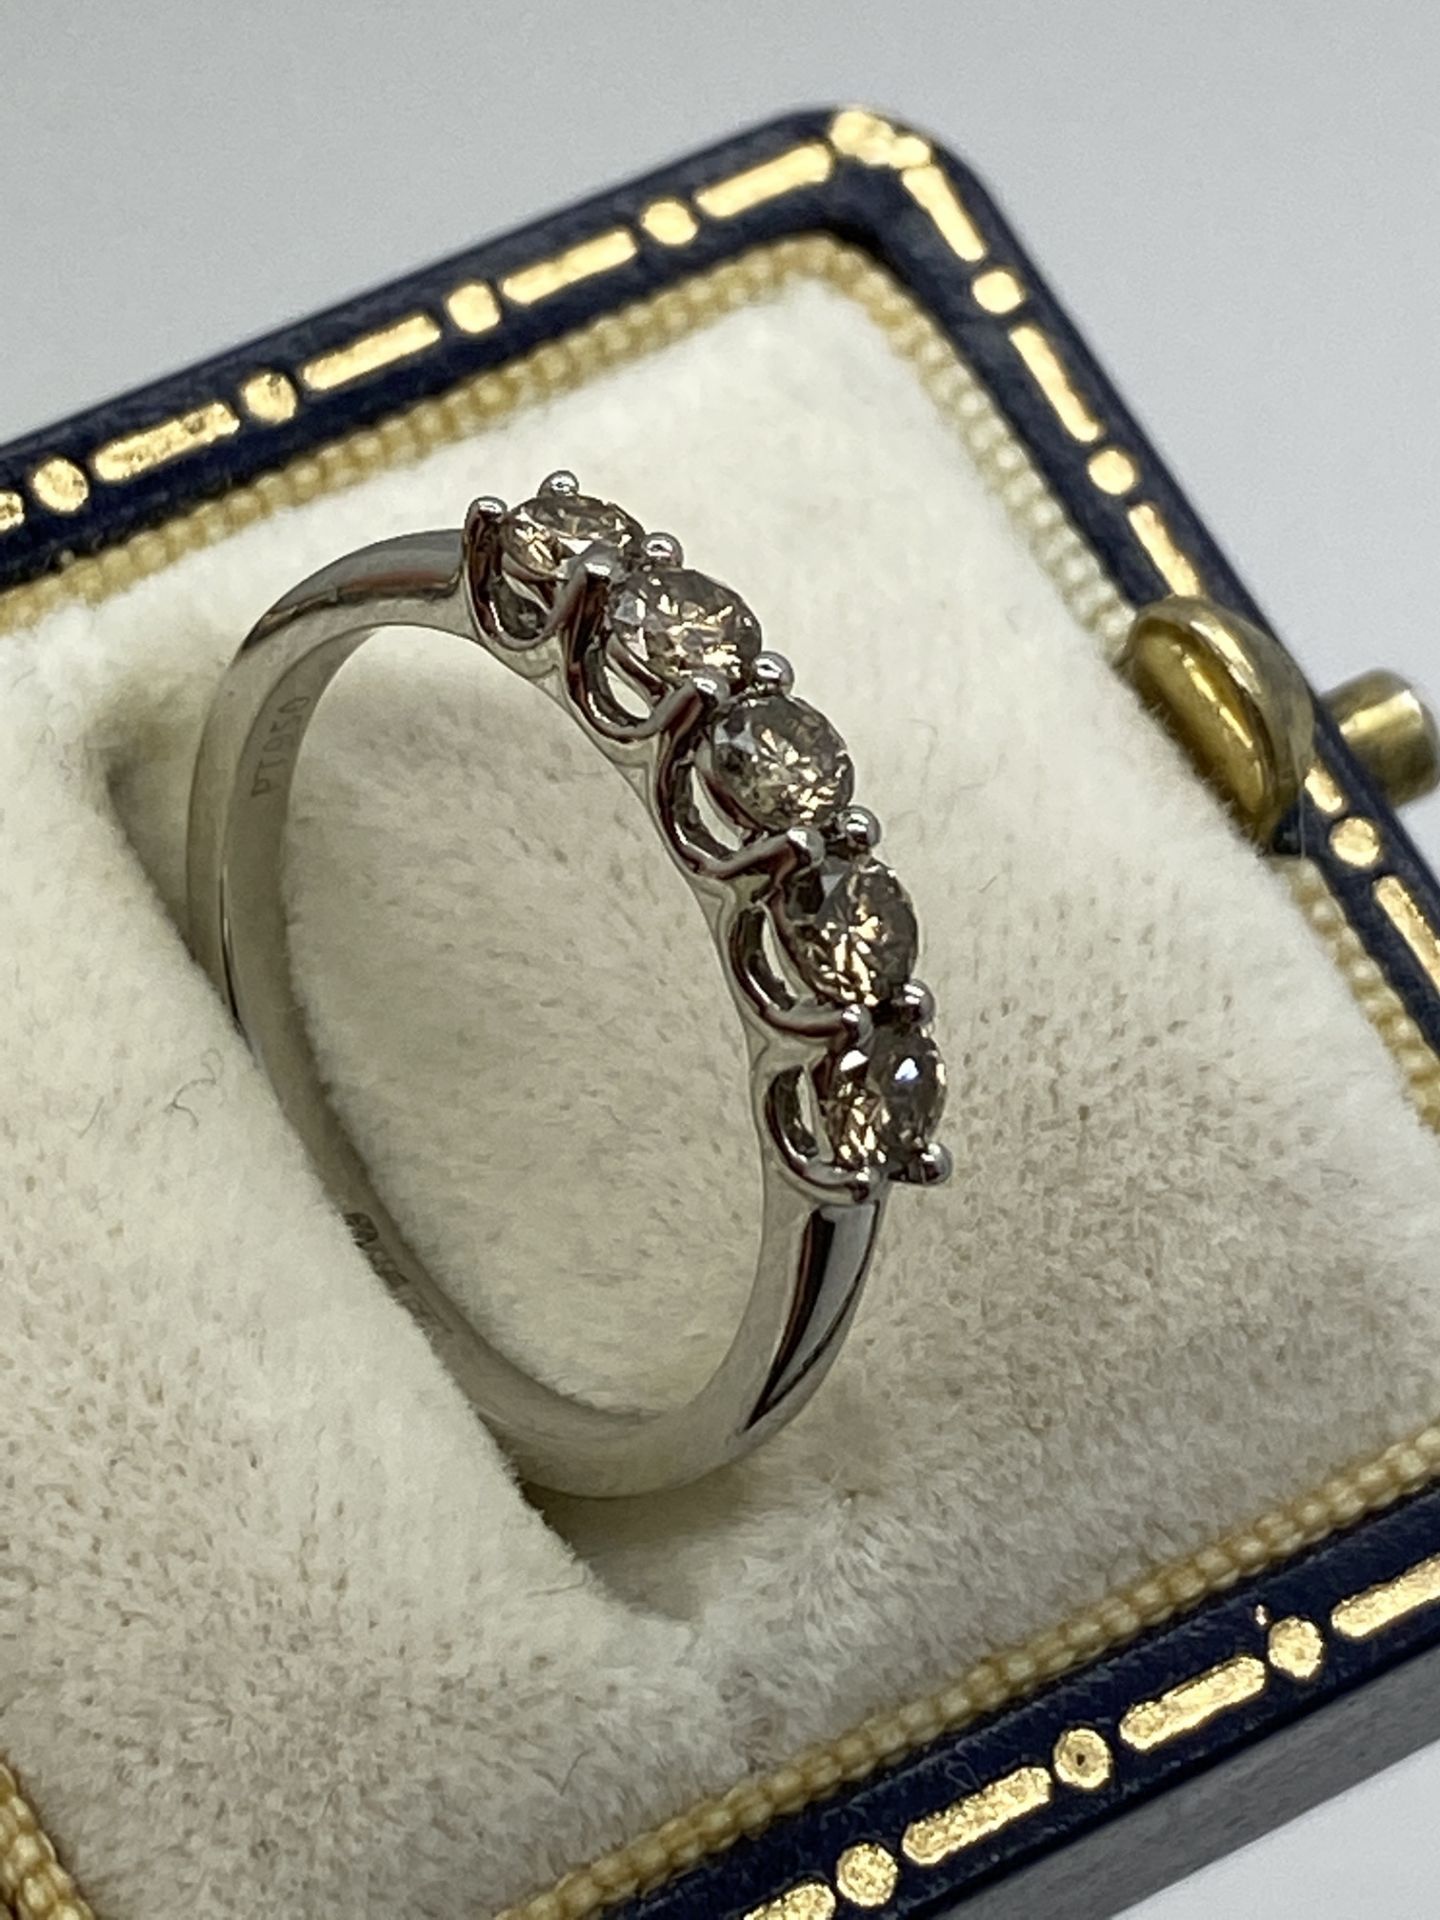 950 PLATINUM 5 STONE COGNAC DIAMOND RING - APPROX. RING SIZE L - Image 9 of 12